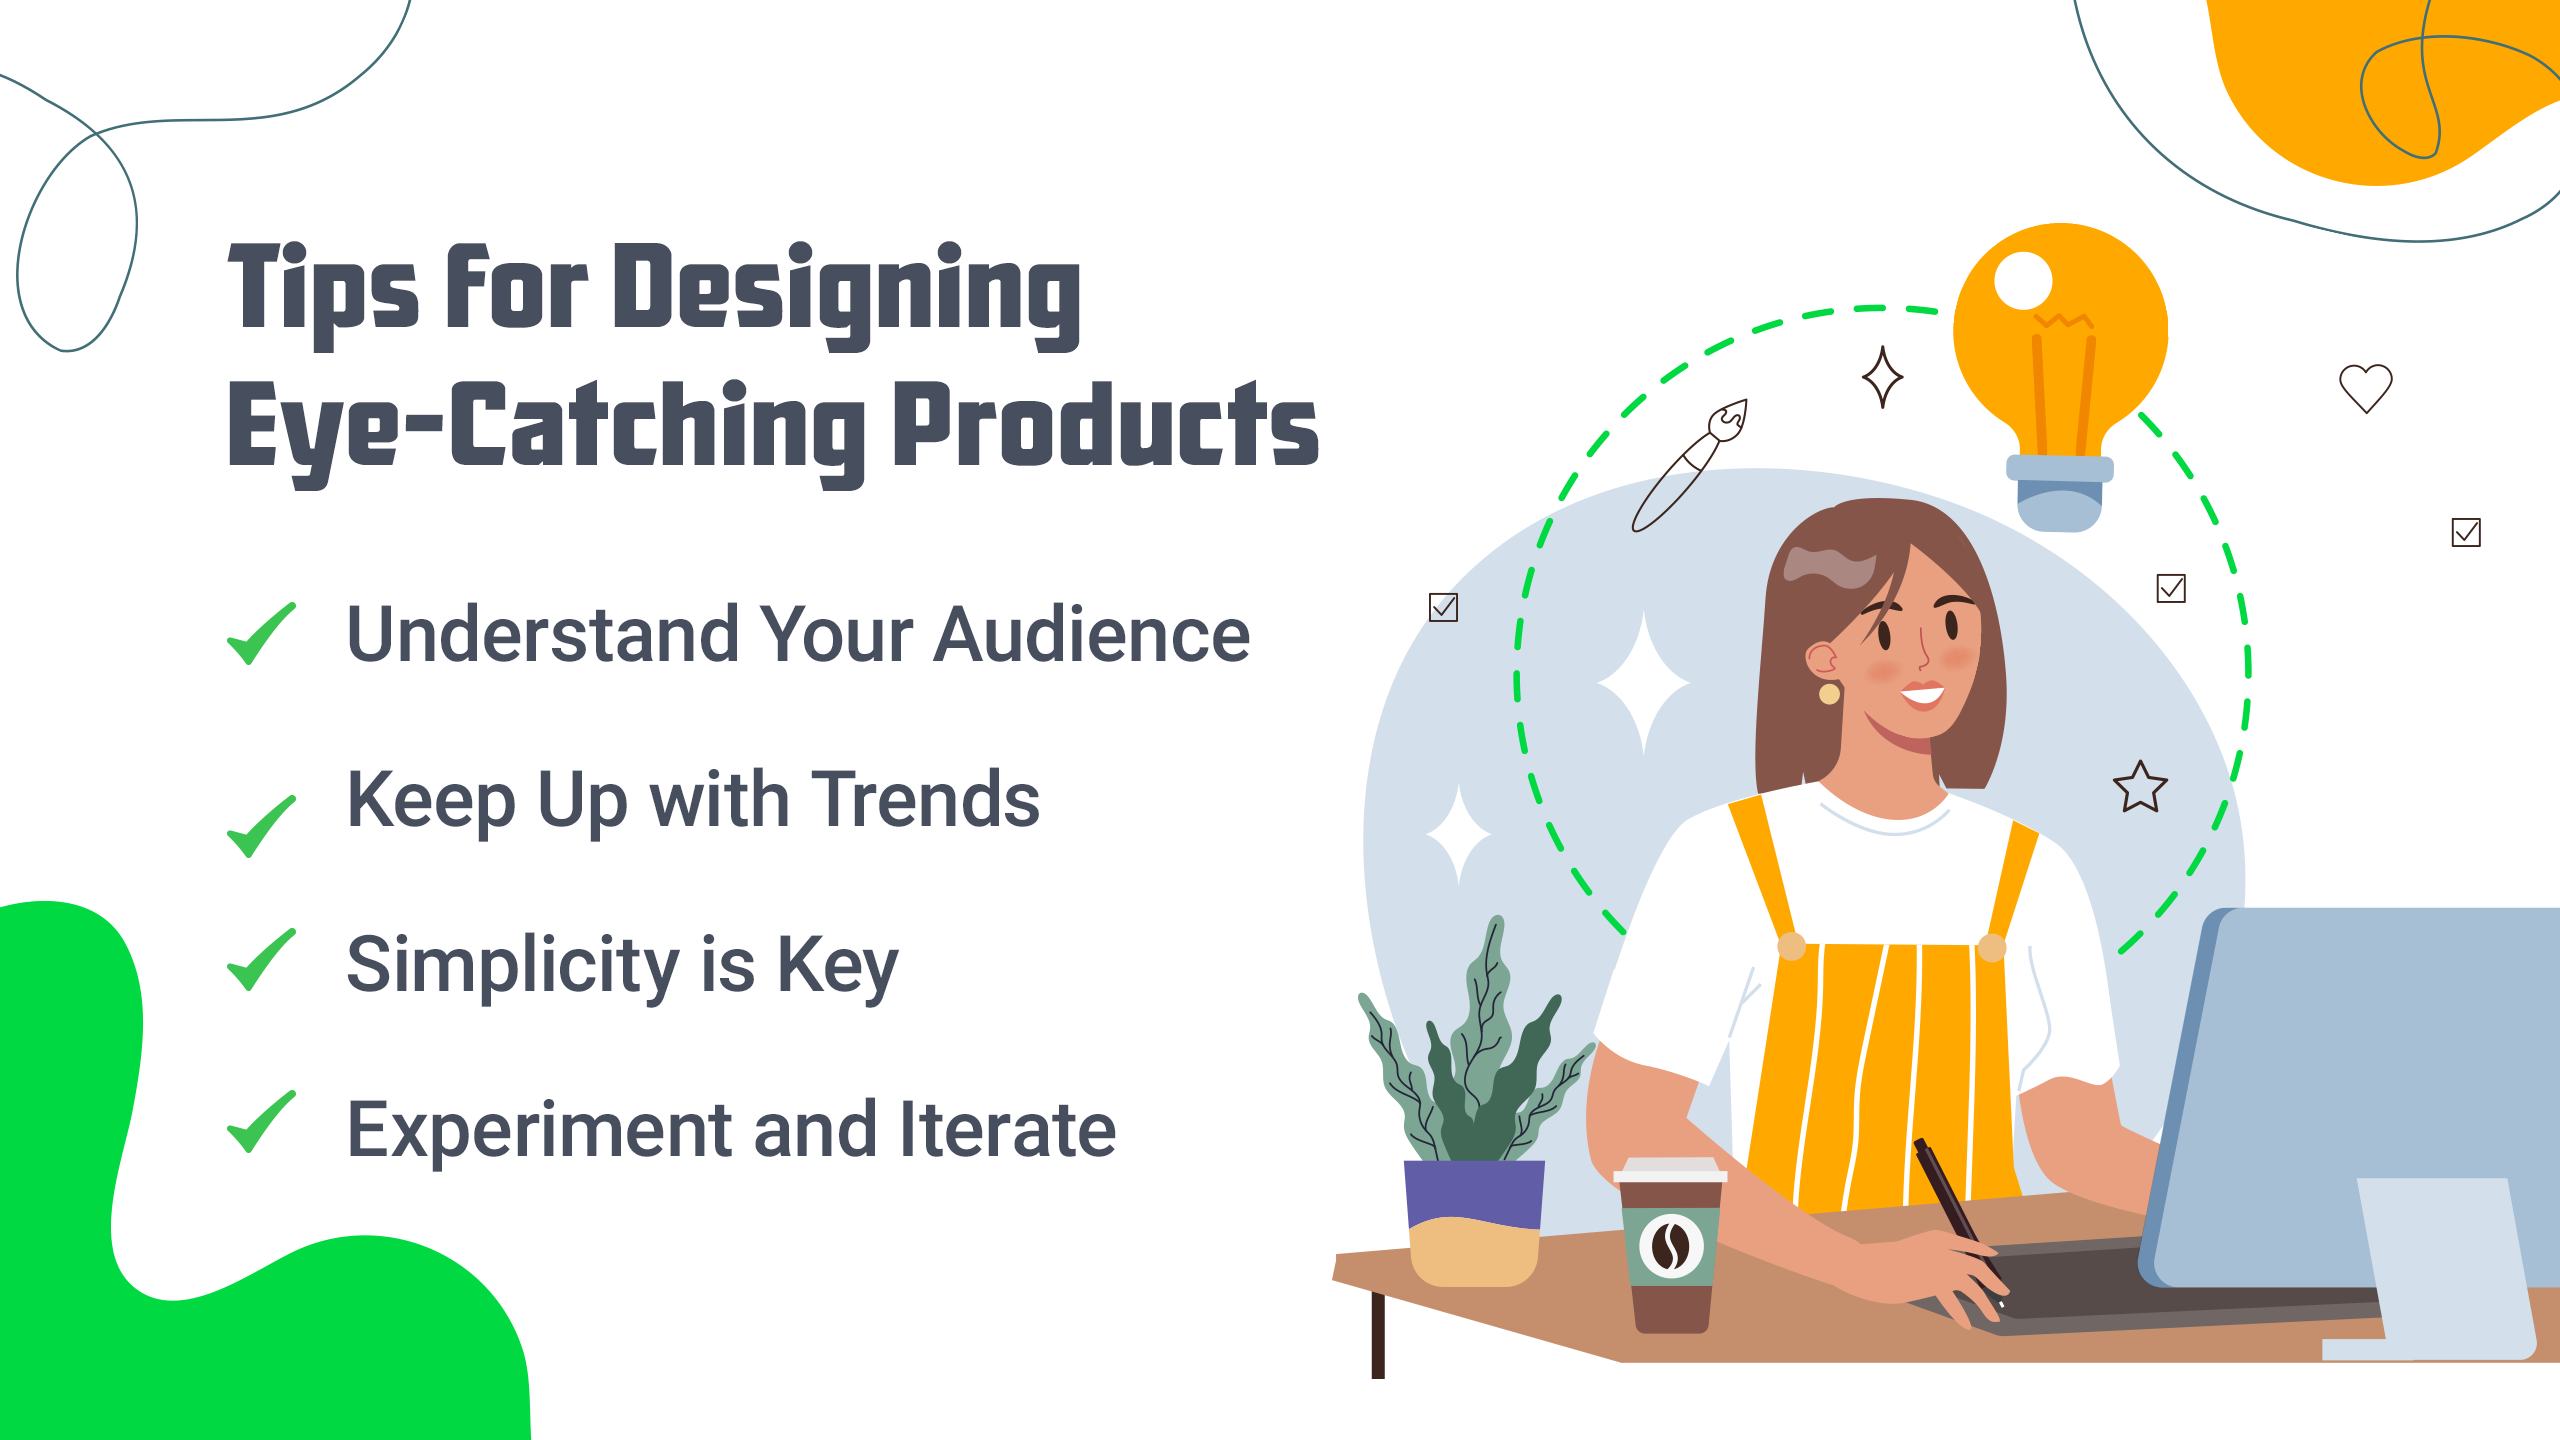 Tips for designing eye-catching products for Shopify